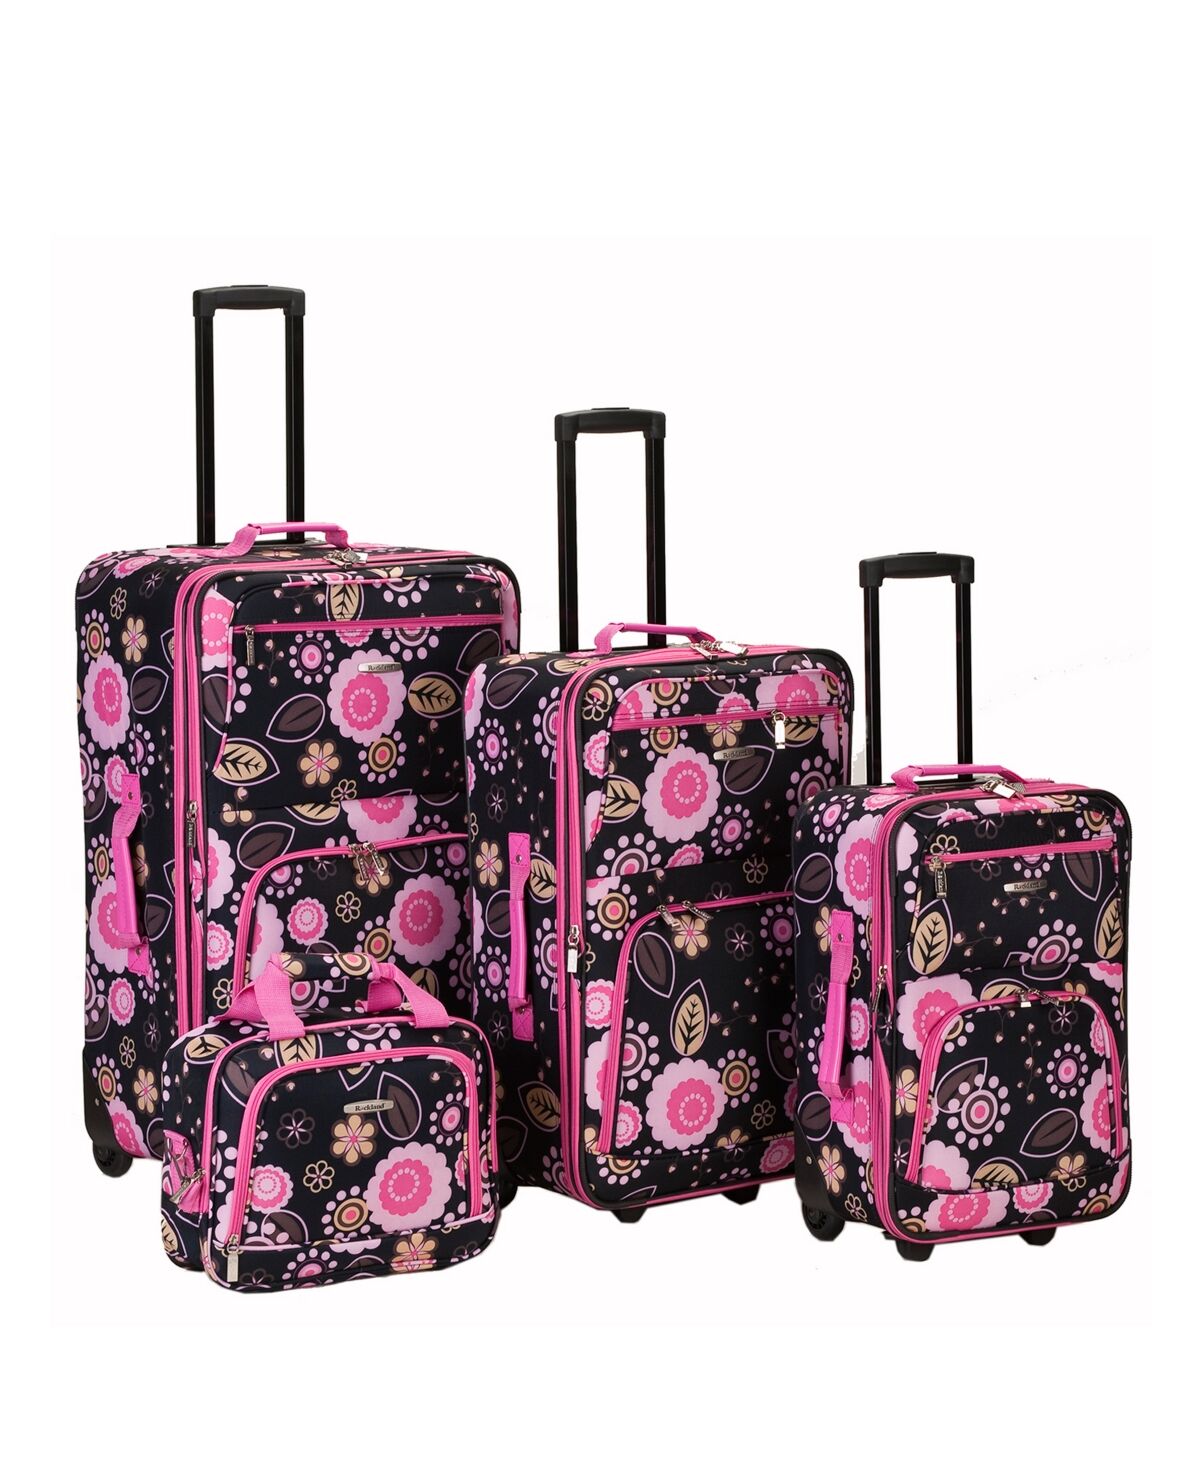 Rockland 4-Pc. Softside Luggage Set - Brown and Pink Floral